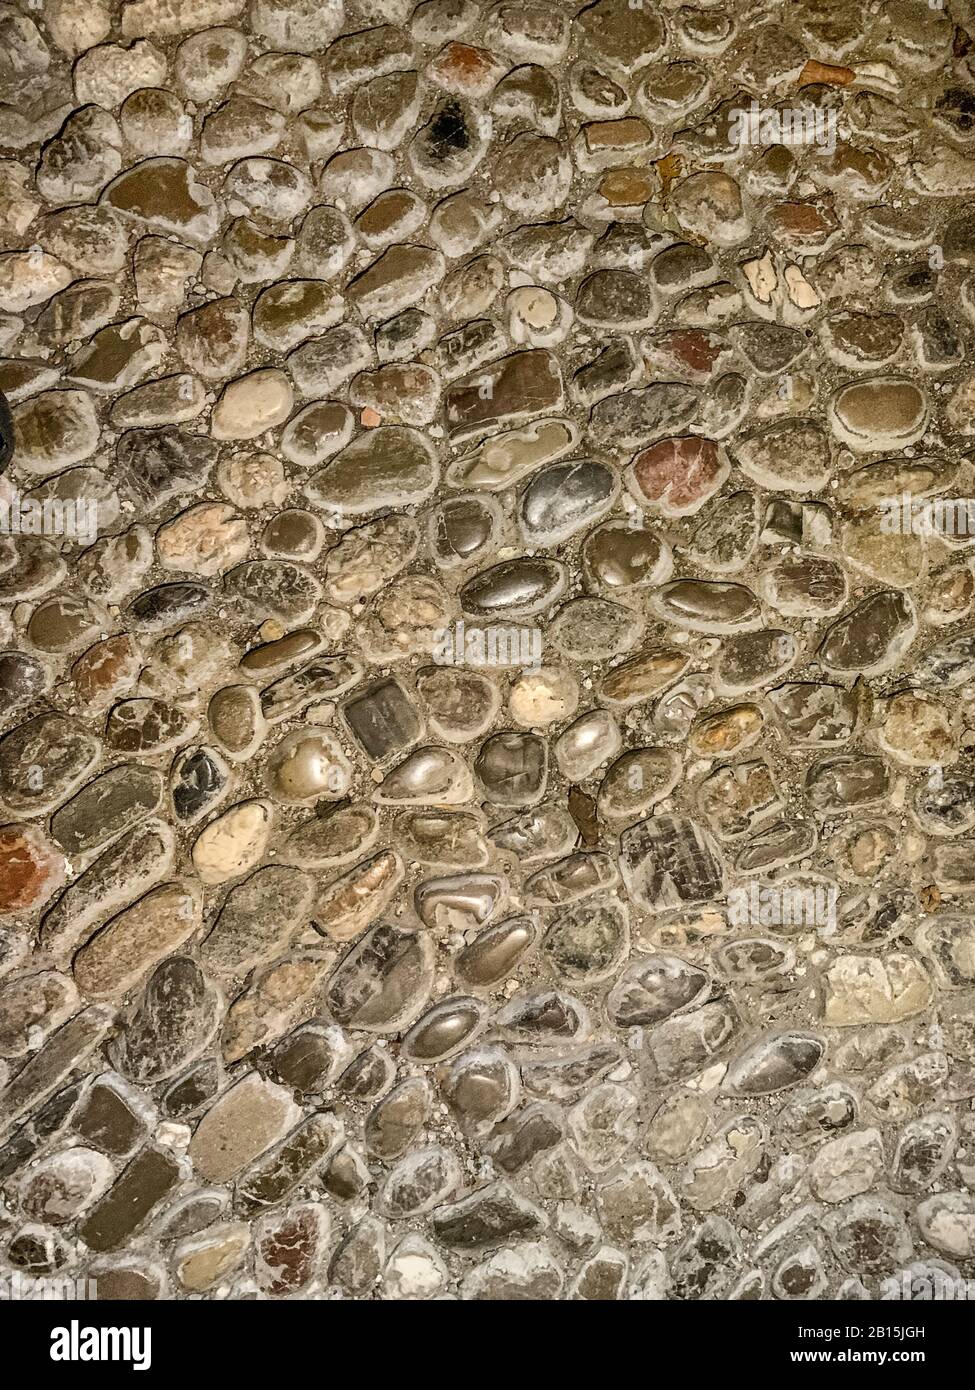 Ground of river pebble stones. Old, weathered and scuffed cobblestones, made of round river stones of different sizes, grouted with mortar. Closeup. Stock Photo